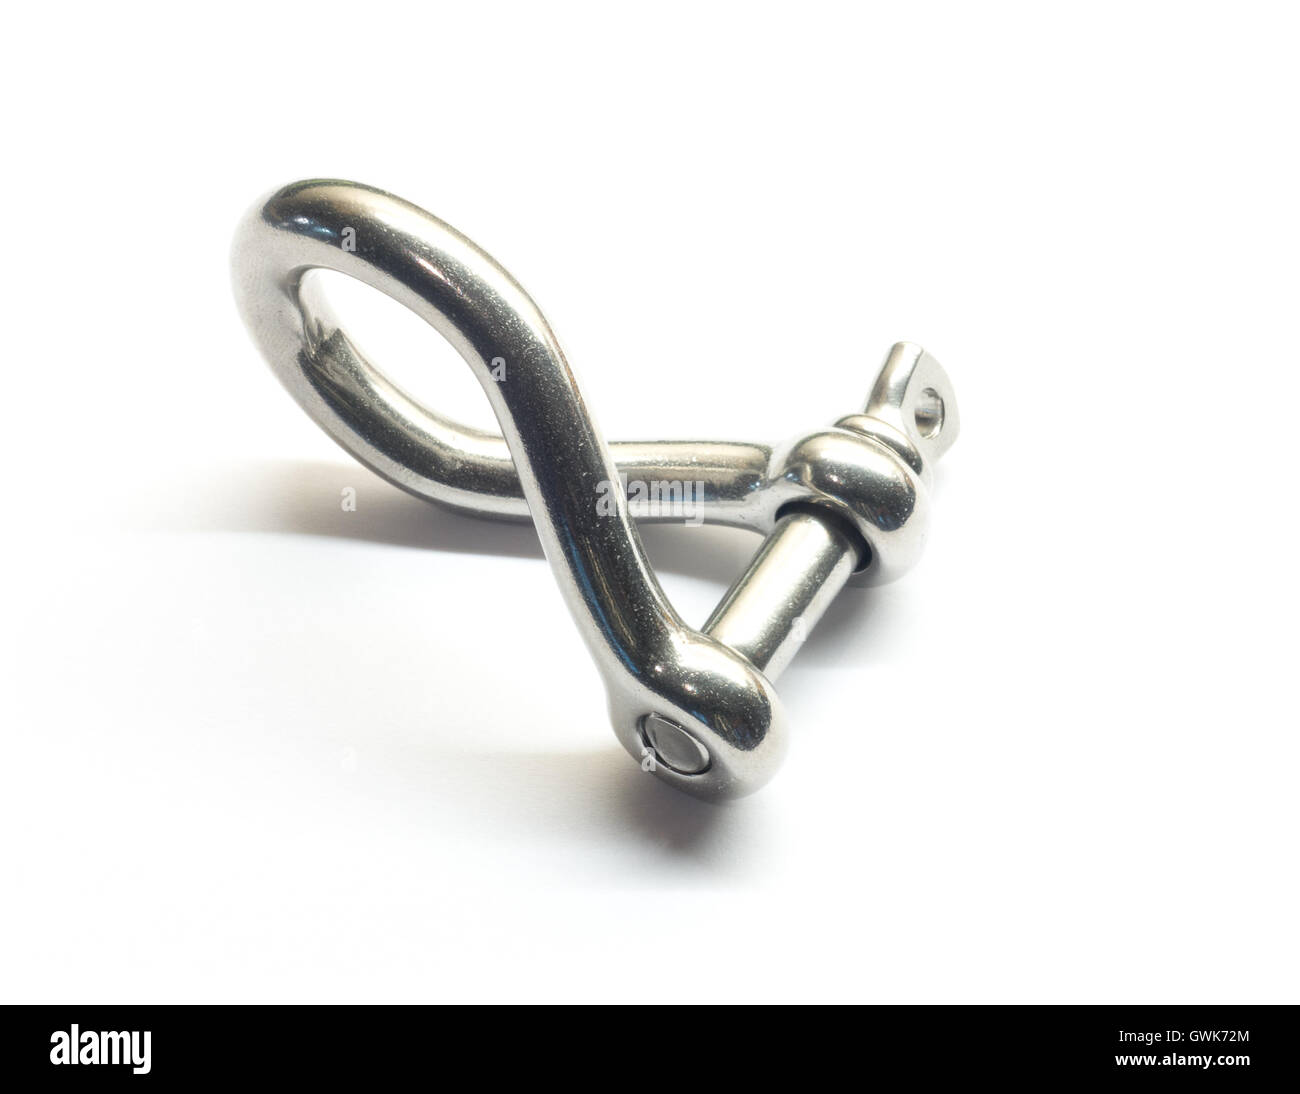 Twisted dee shackle made from 316 A4 stainless steel Stock Photo